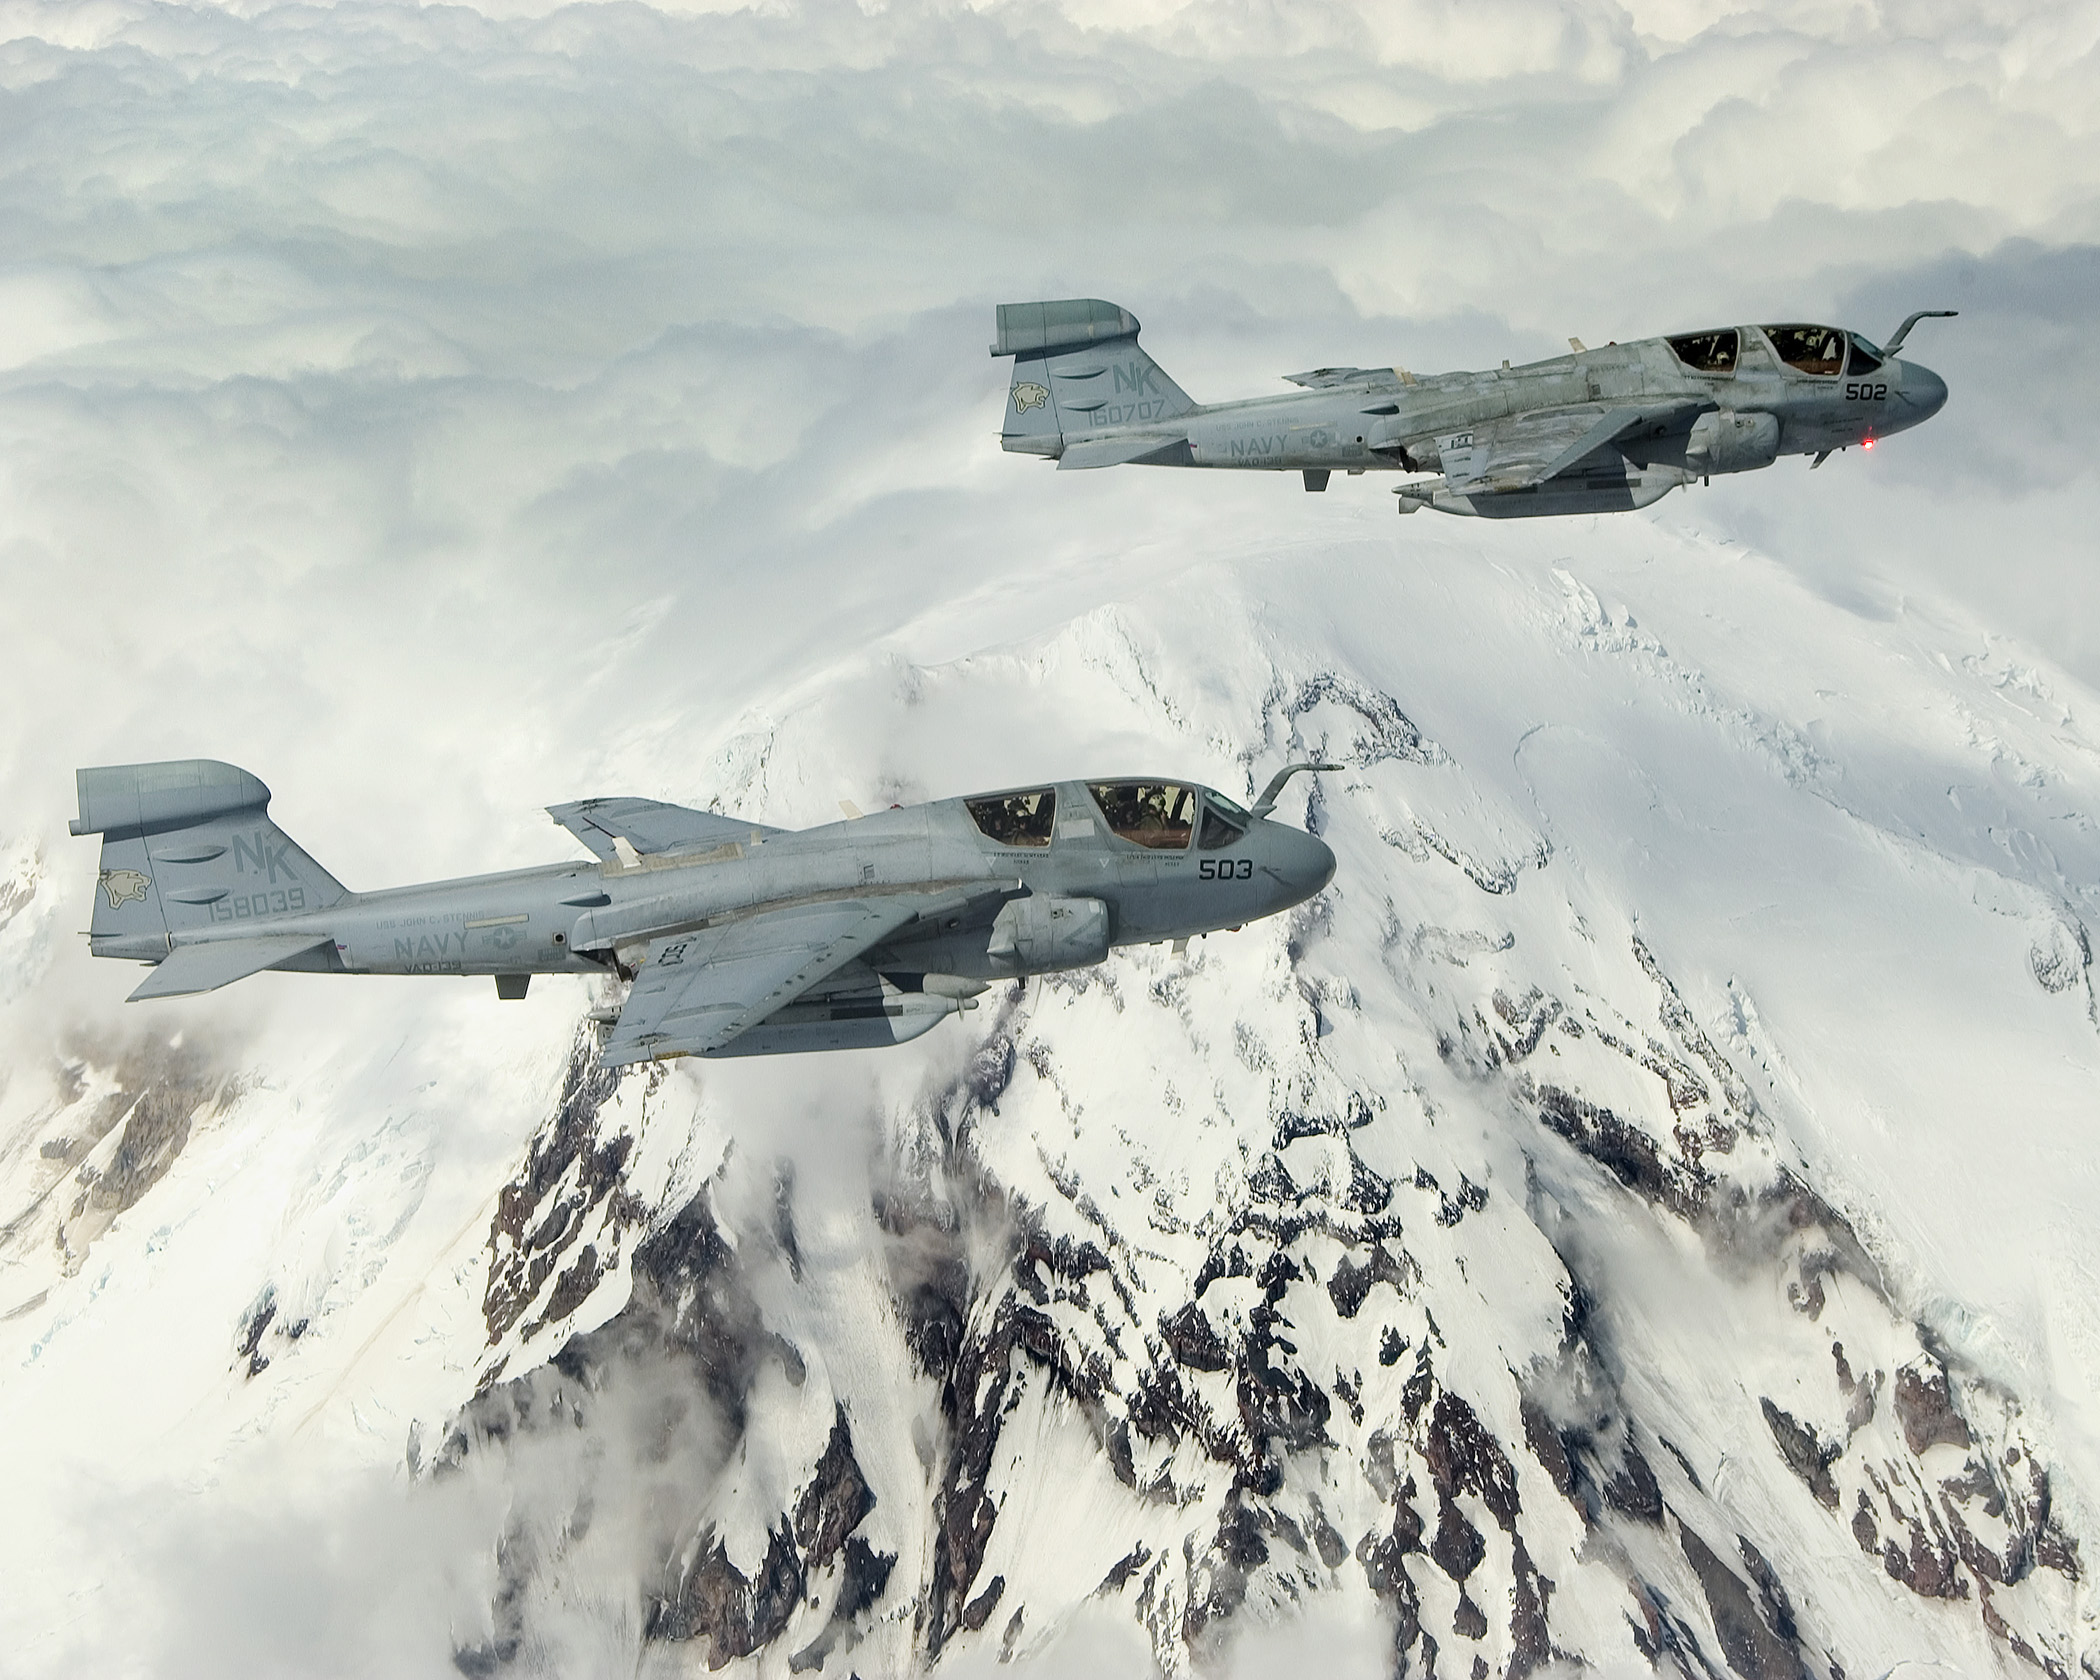 US Navy 040519-N-6436W-006 Two EA-6B Prowlers assigned to the Cougars of Electronic Attack Squadron One Three Nine (VAQ-139) fly in formation around Washington's Mount Rainier